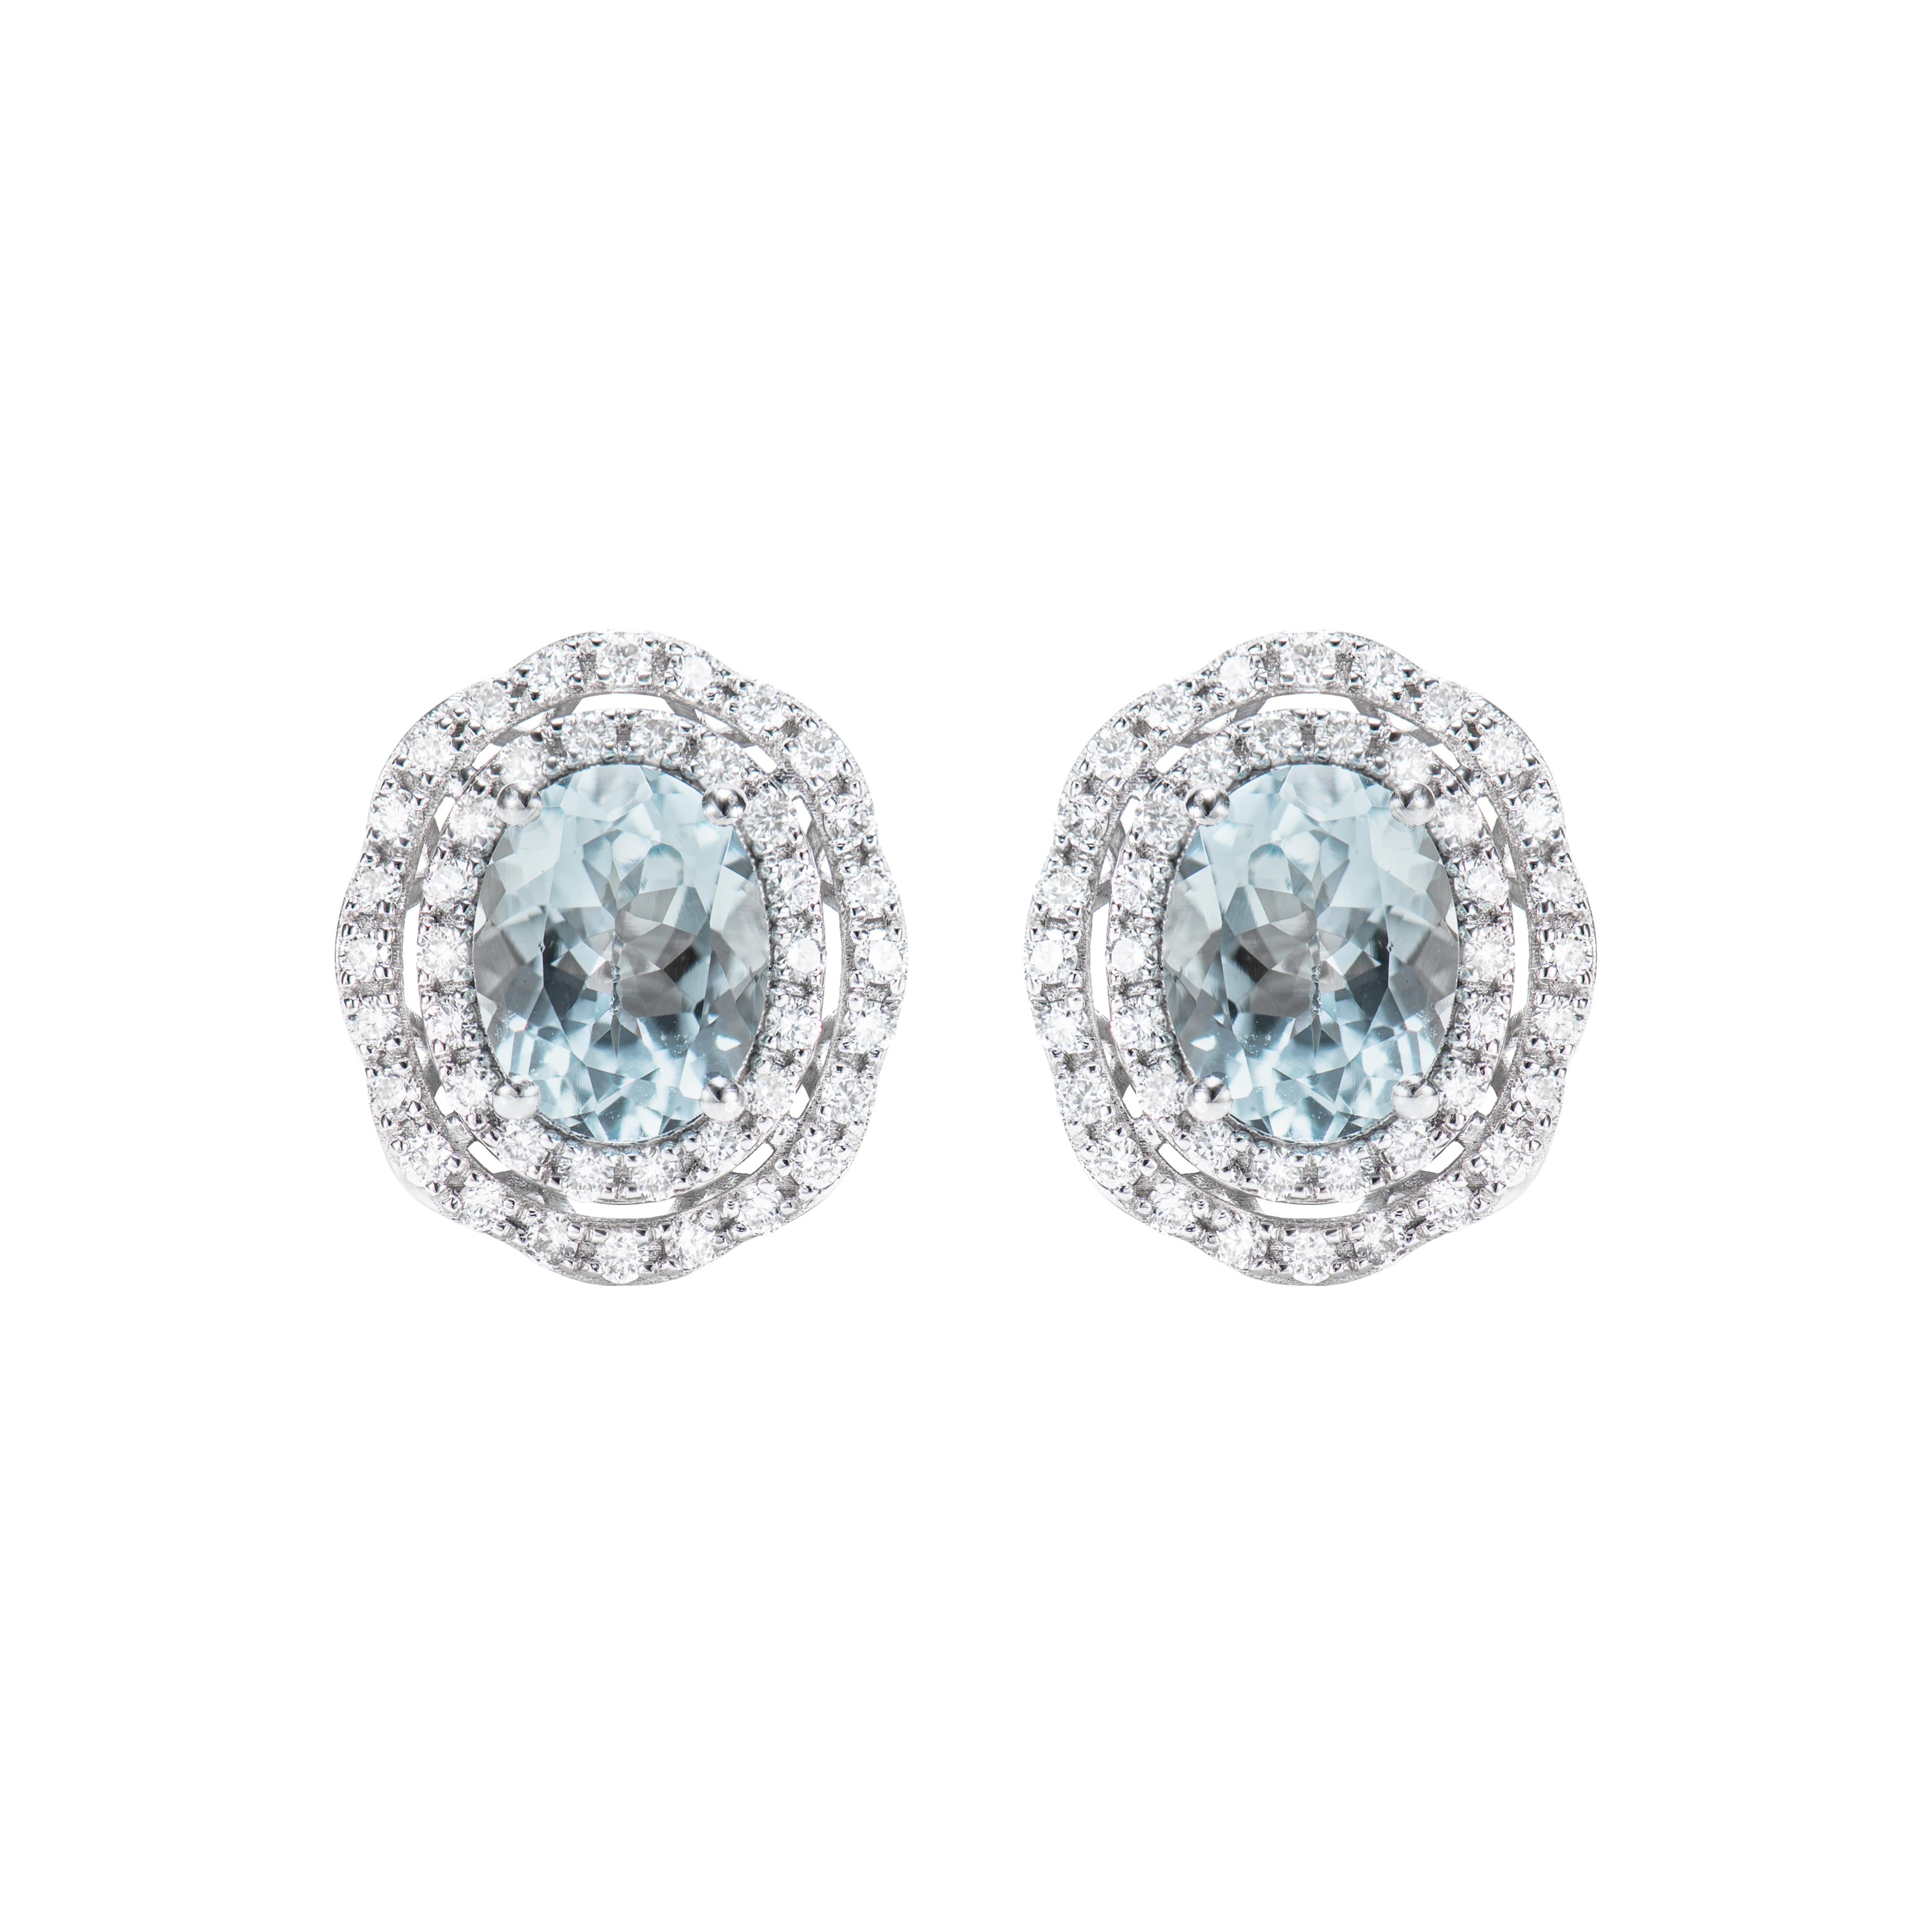 Contemporary Aquamarine and White Diamond Studs Earring in 18 Karat White Gold. For Sale